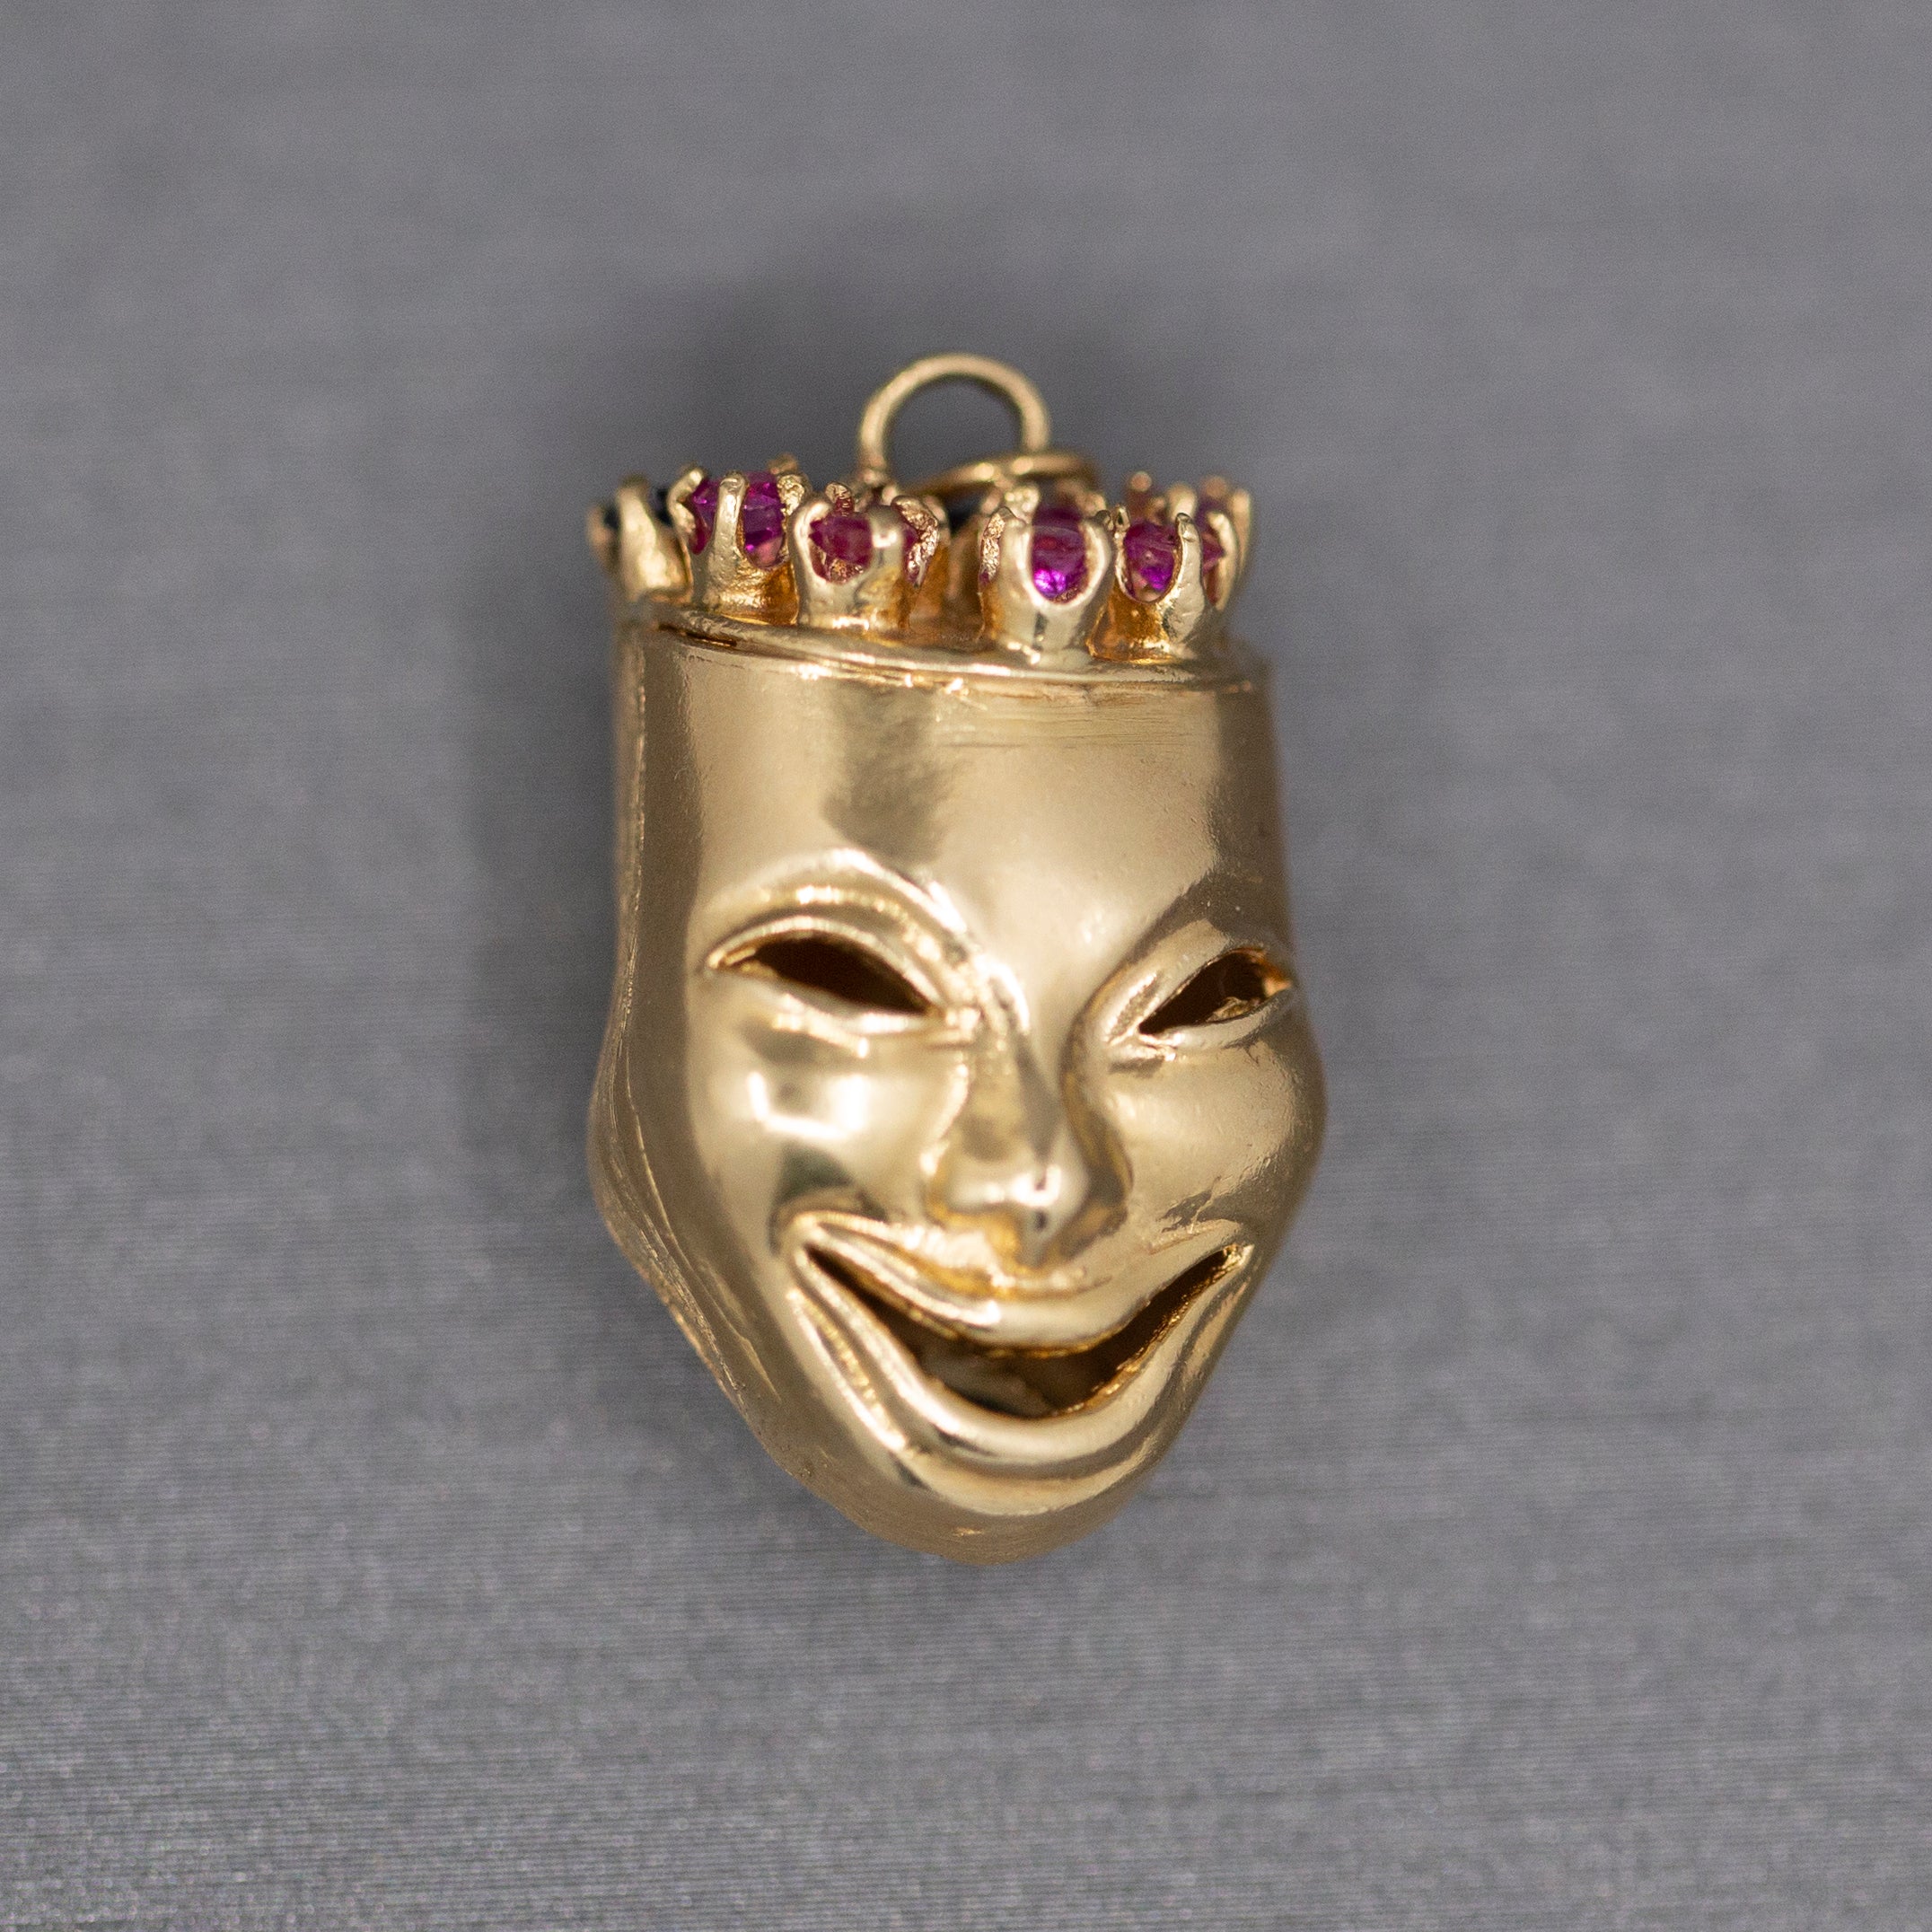 Fantastic Large Theatre Happy and Sad Face Double Sided Pendant Charm with Rubies and Sapphires in 14k Yellow Gold